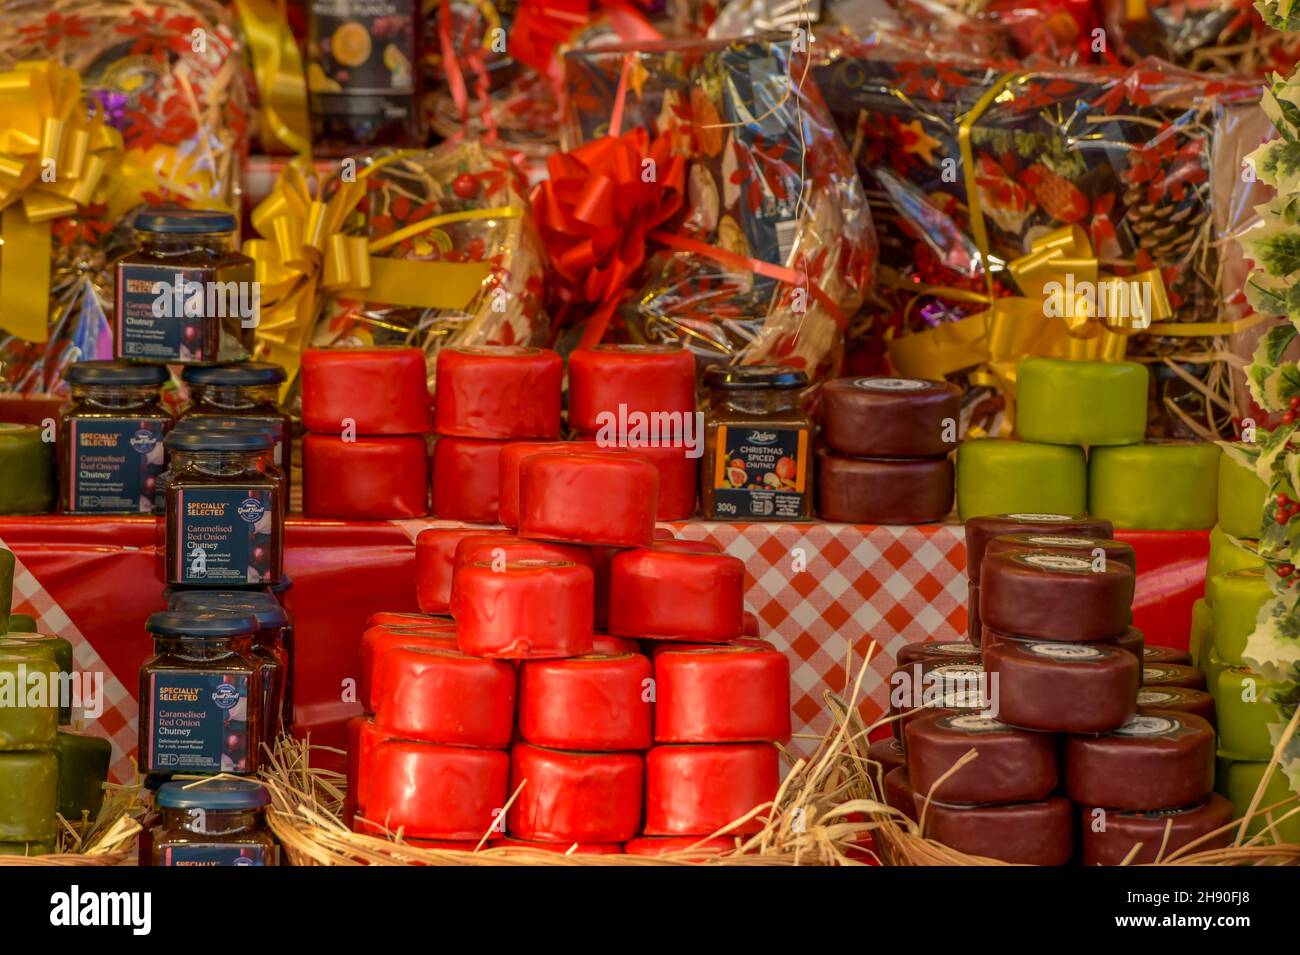 selection of cheeses on sale at a market stall on a christmas market, festive foods and fayre, christmas foods and gifts on a seasona market stall. Stock Photo